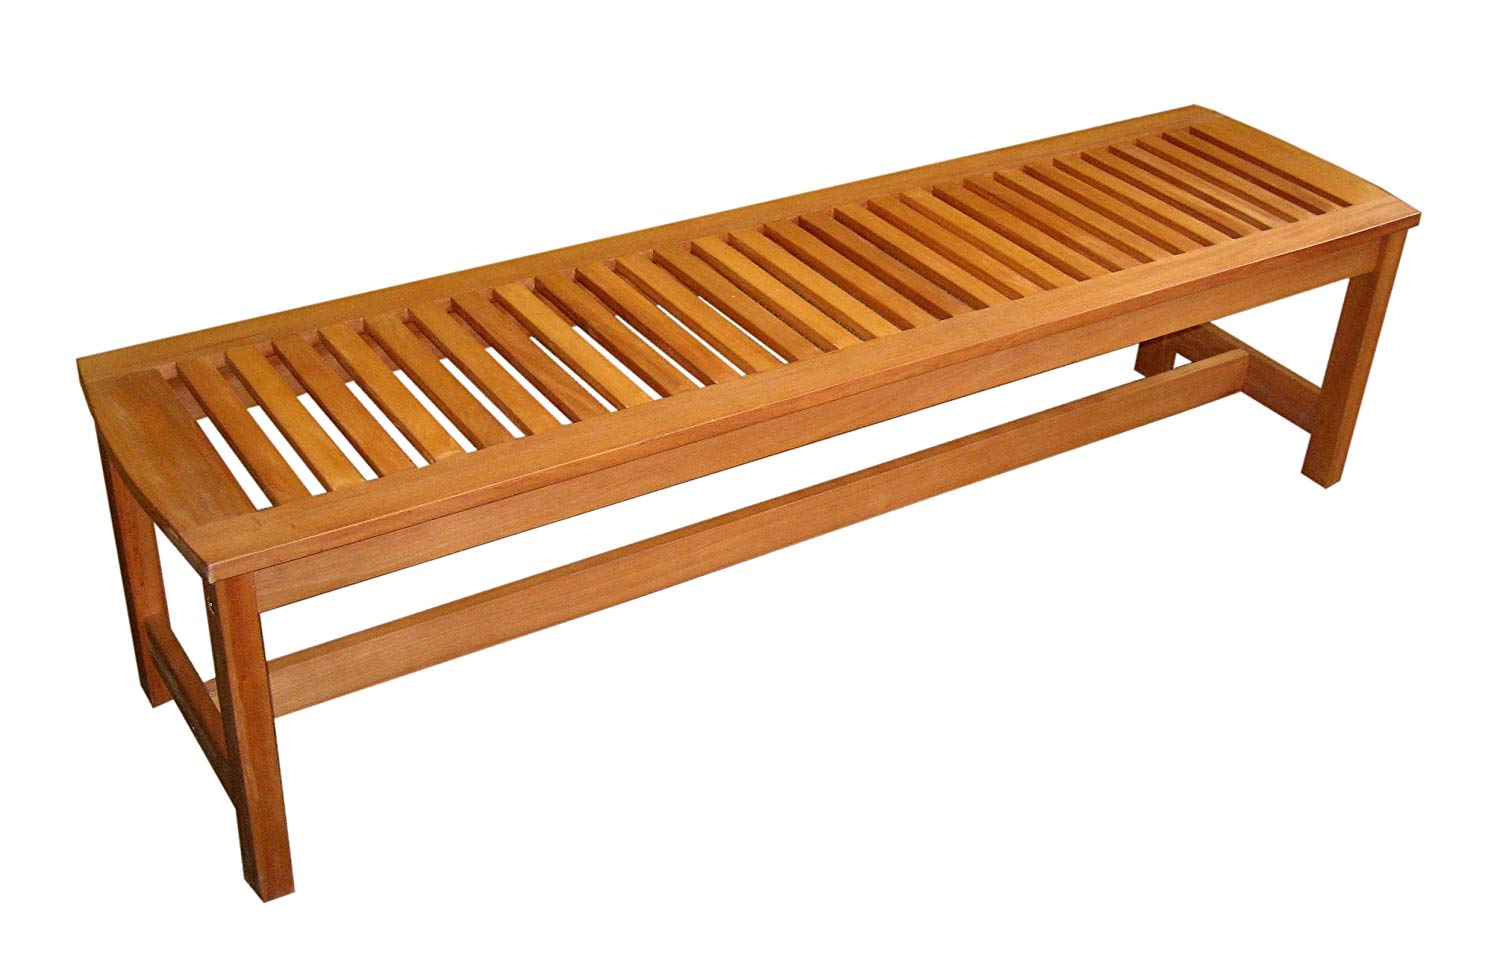 outdoor benches amazon.com : arboria outdoor bench backless large 5 foot length premium FHBOFJQ